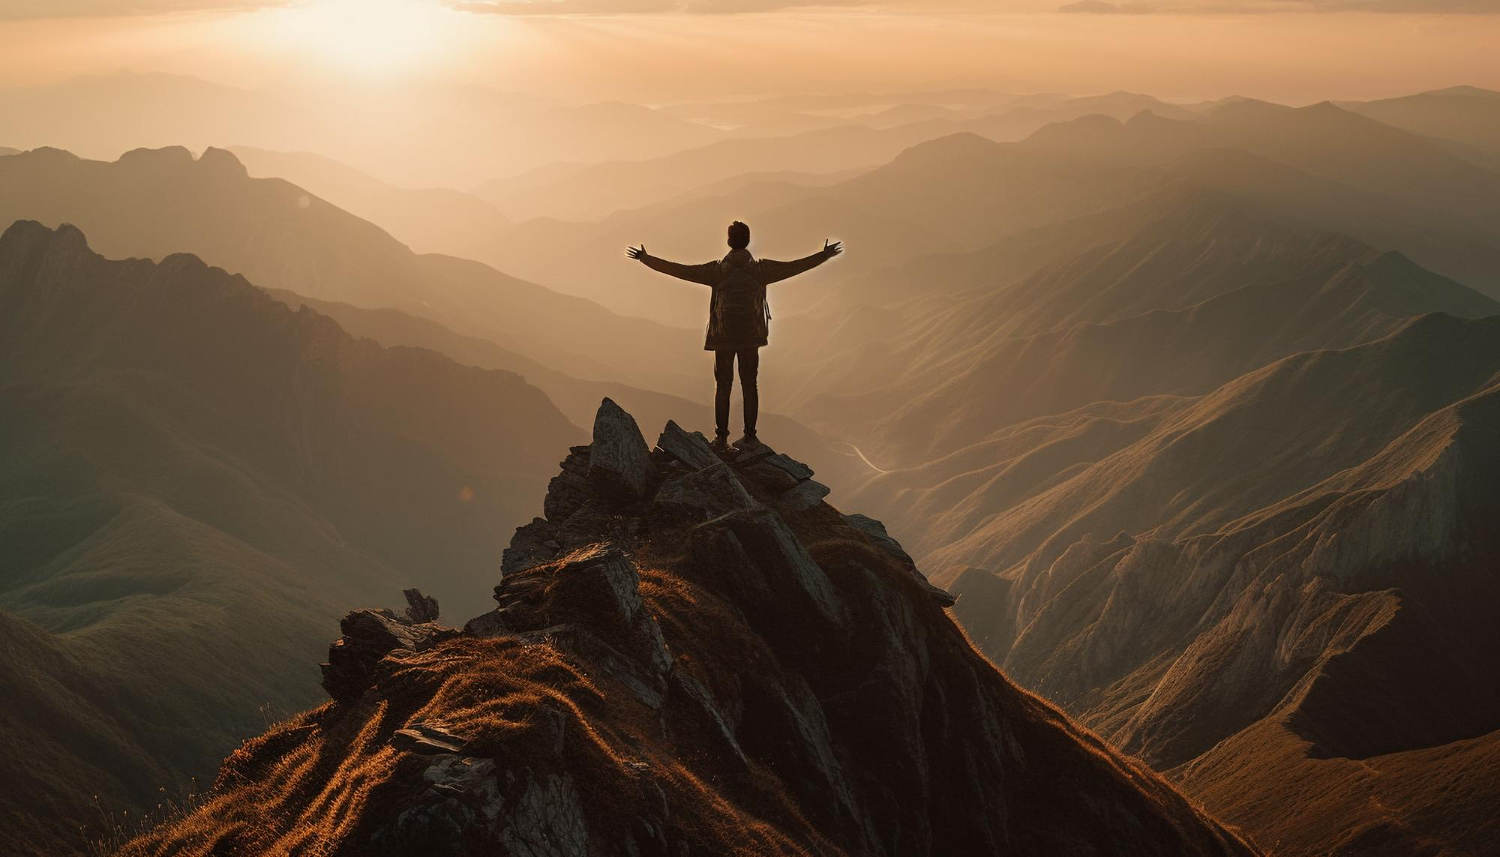 Man standing triumphantly atop rocky mountain peak with arms raised